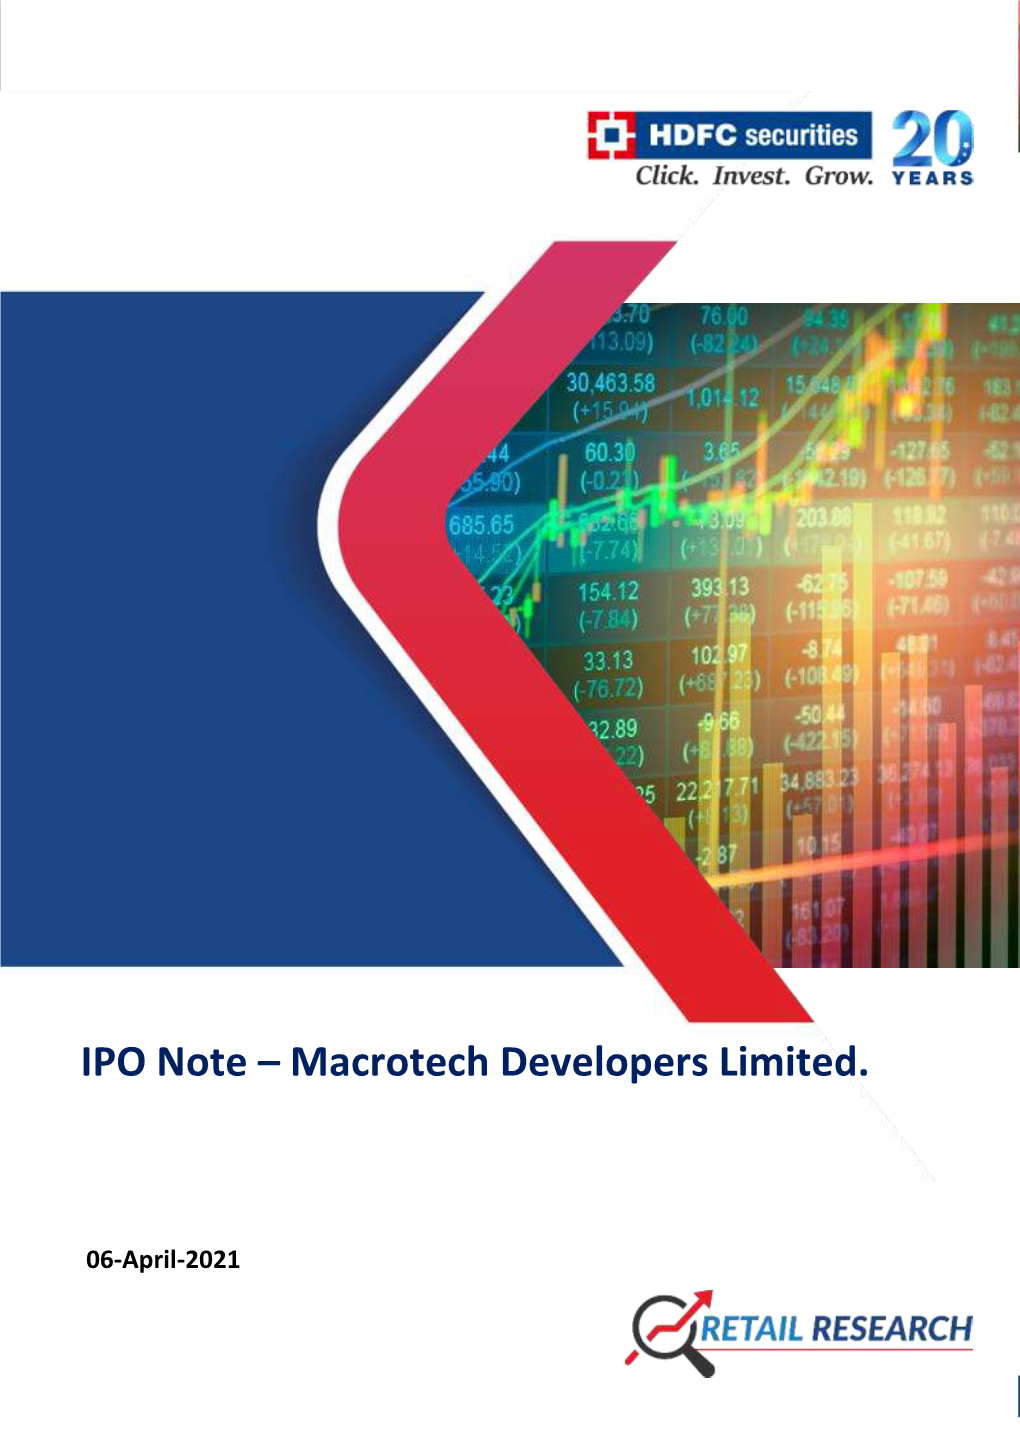 IPO Note – Macrotech Developers Limited